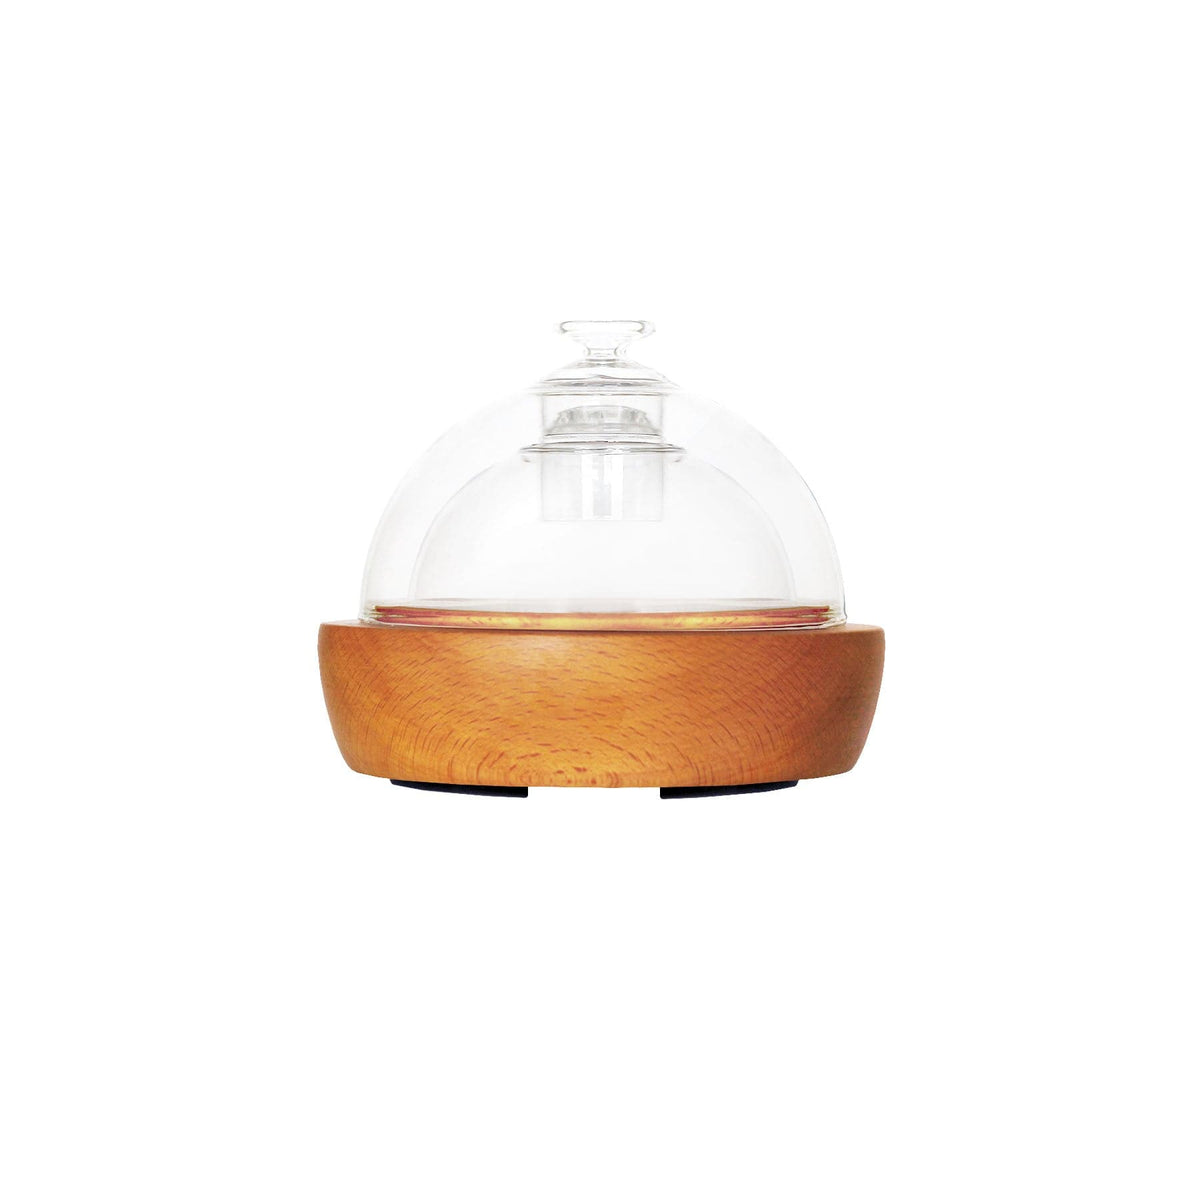 Hysses Burners/Devices Ultrasonic Water Mist, Dome